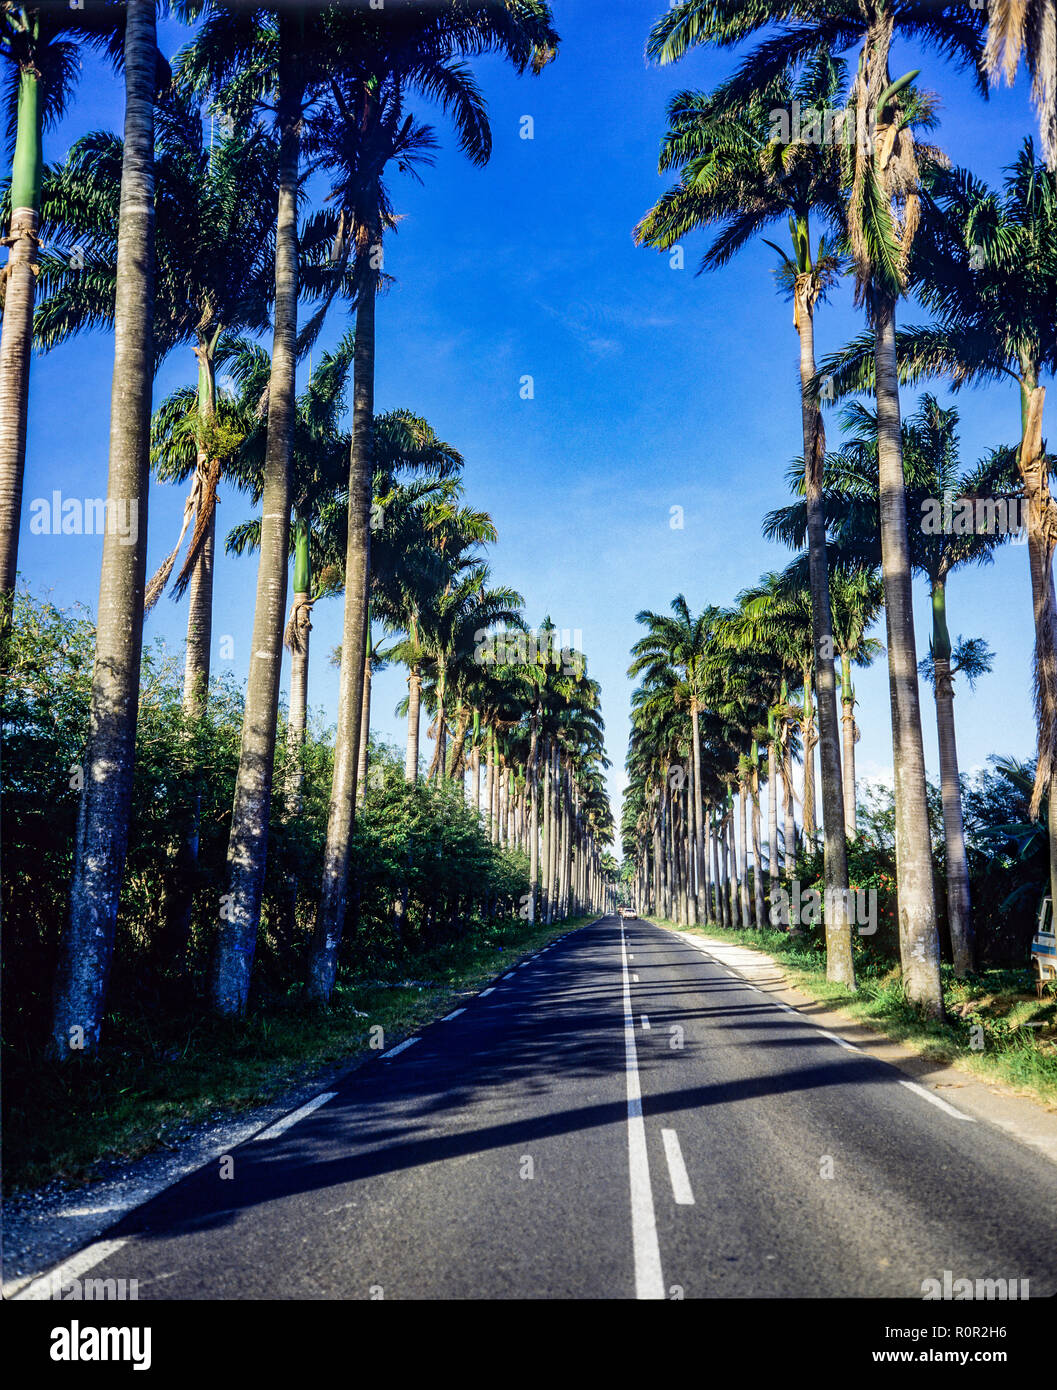 Allée Dumanoir, road lined up with royal palm trees, Guadeloupe, French West Indies, Stock Photo